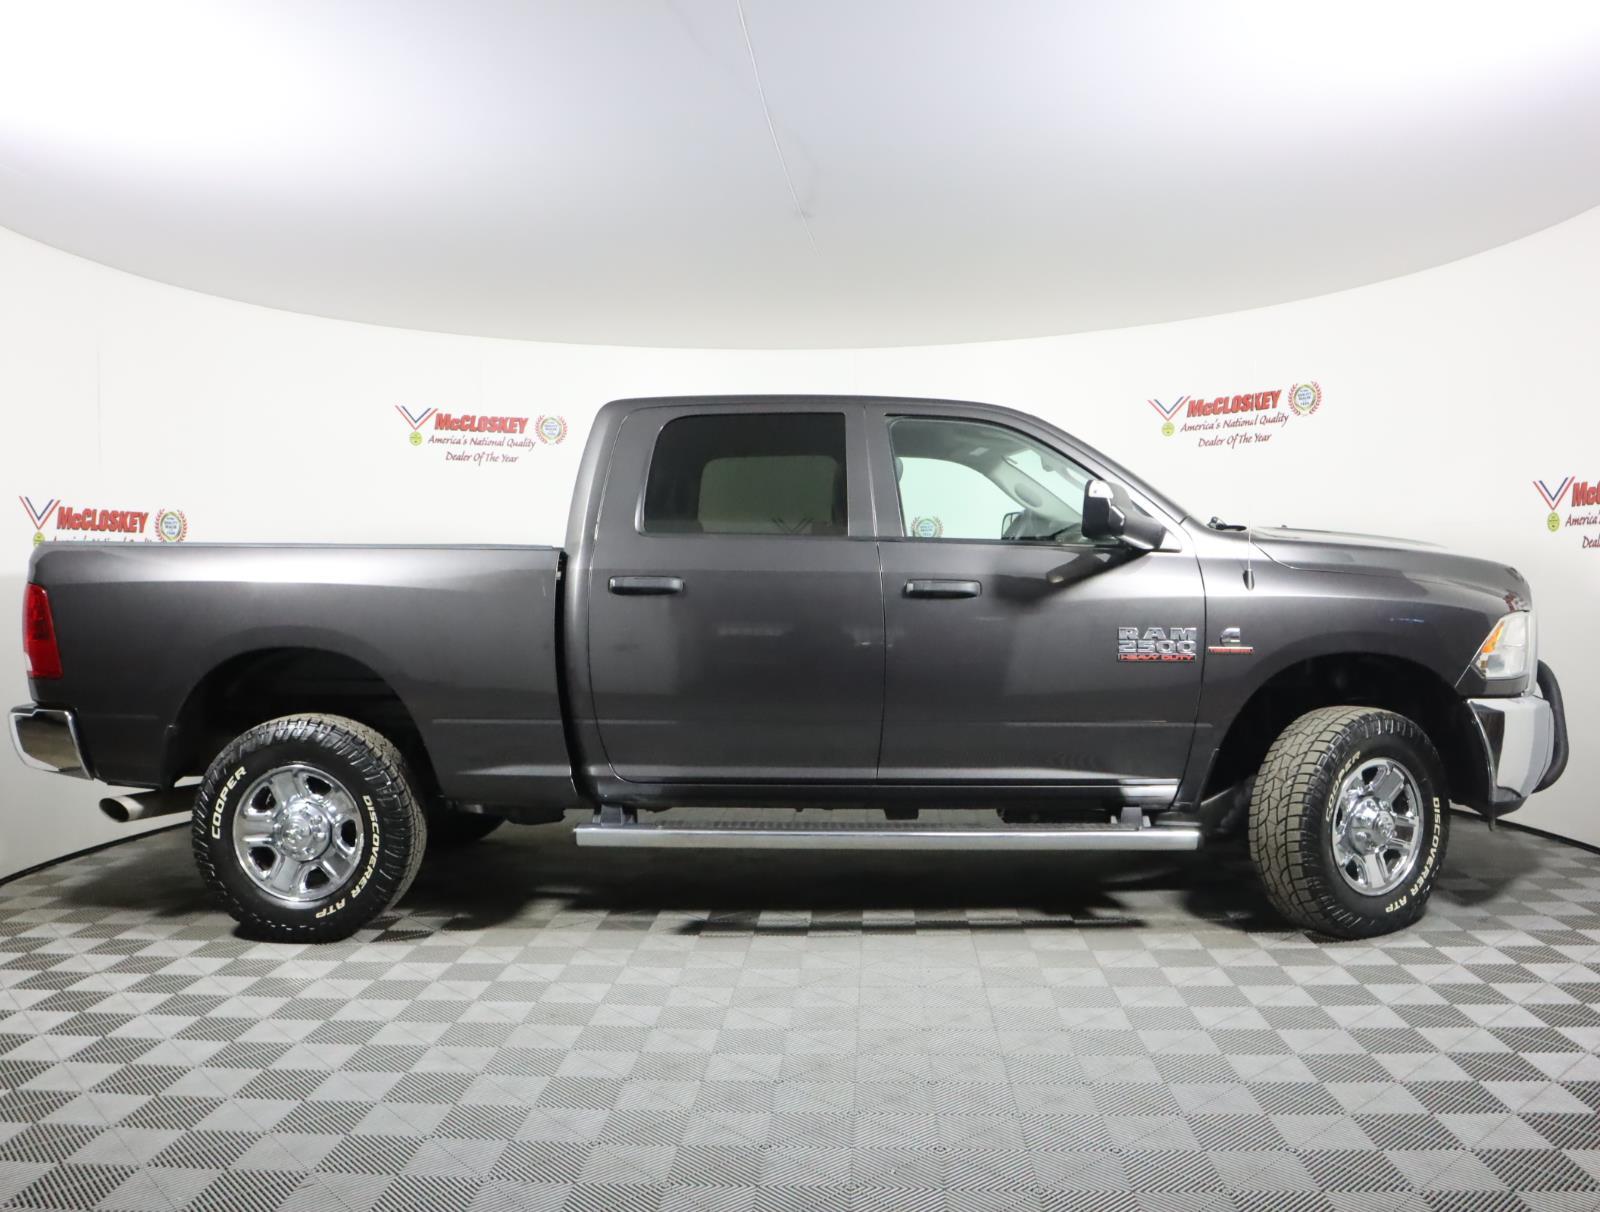 Preowned 2016 Ram 2500 Tradesman for sale by McCloskey Imports & 4X4's in Colorado Springs, CO